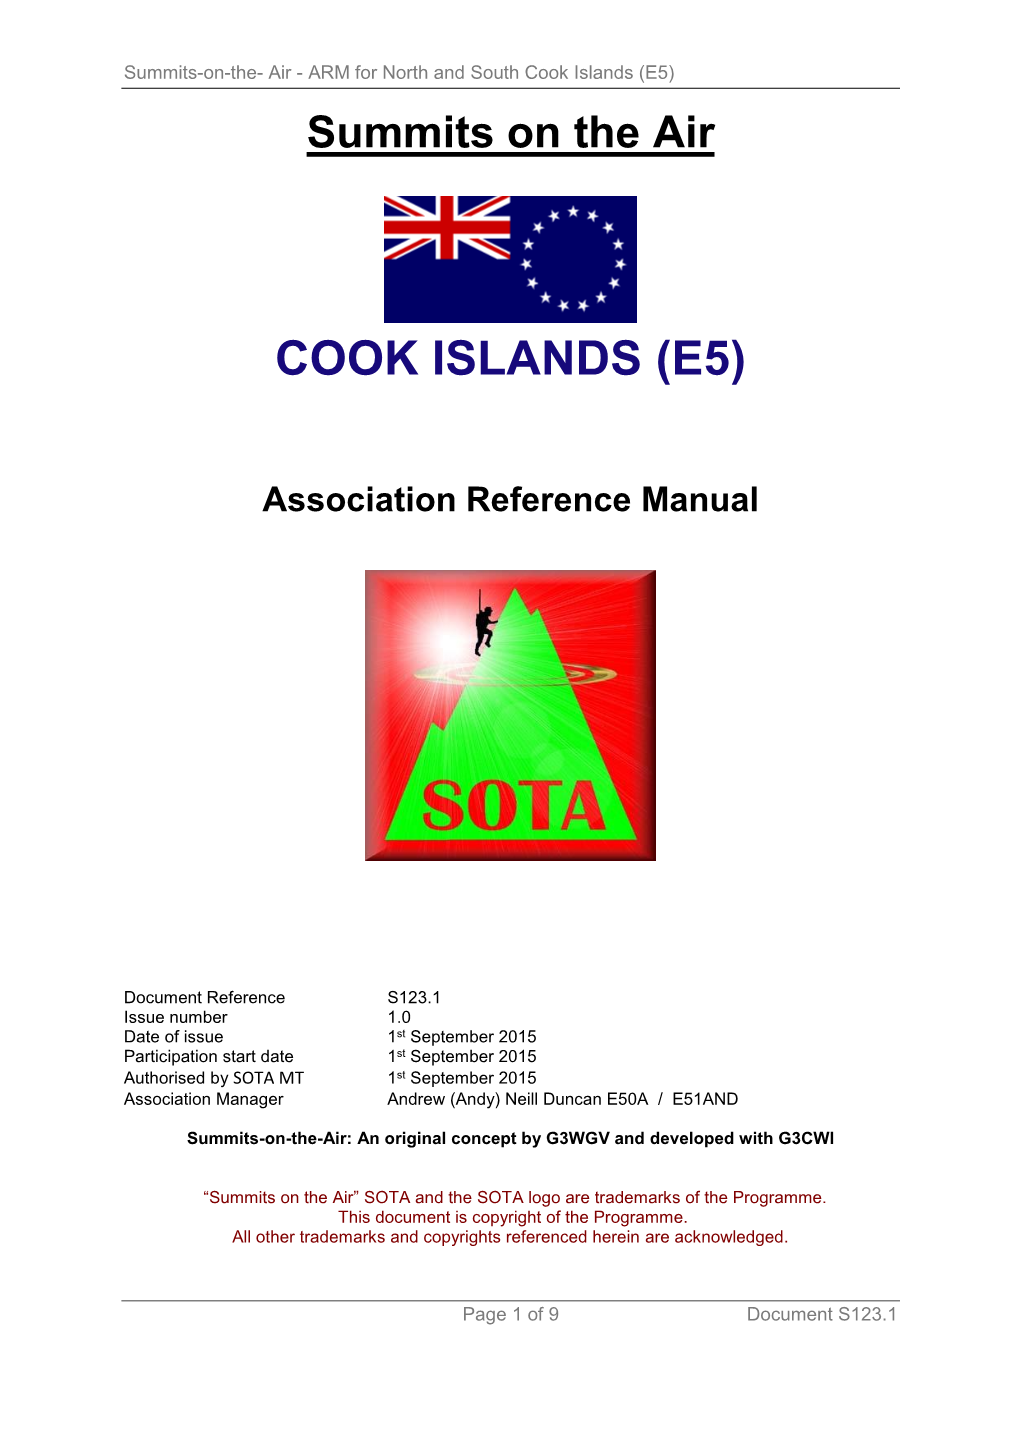 Summits on the Air COOK ISLANDS